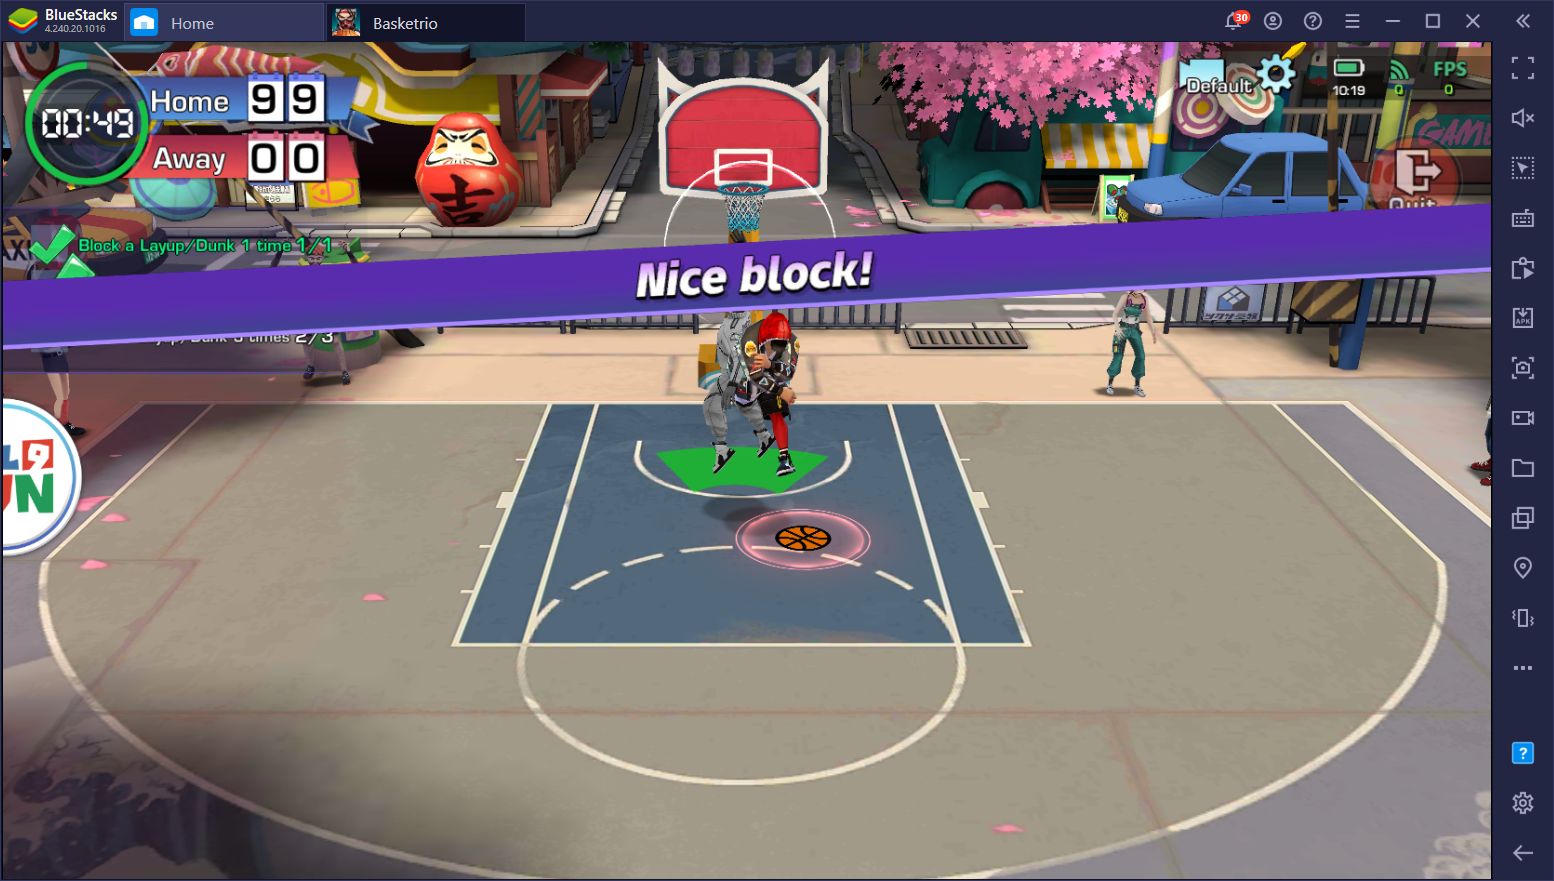 Basketrio for PC - How to Play This Awesome Mobile Basketball Game on PC